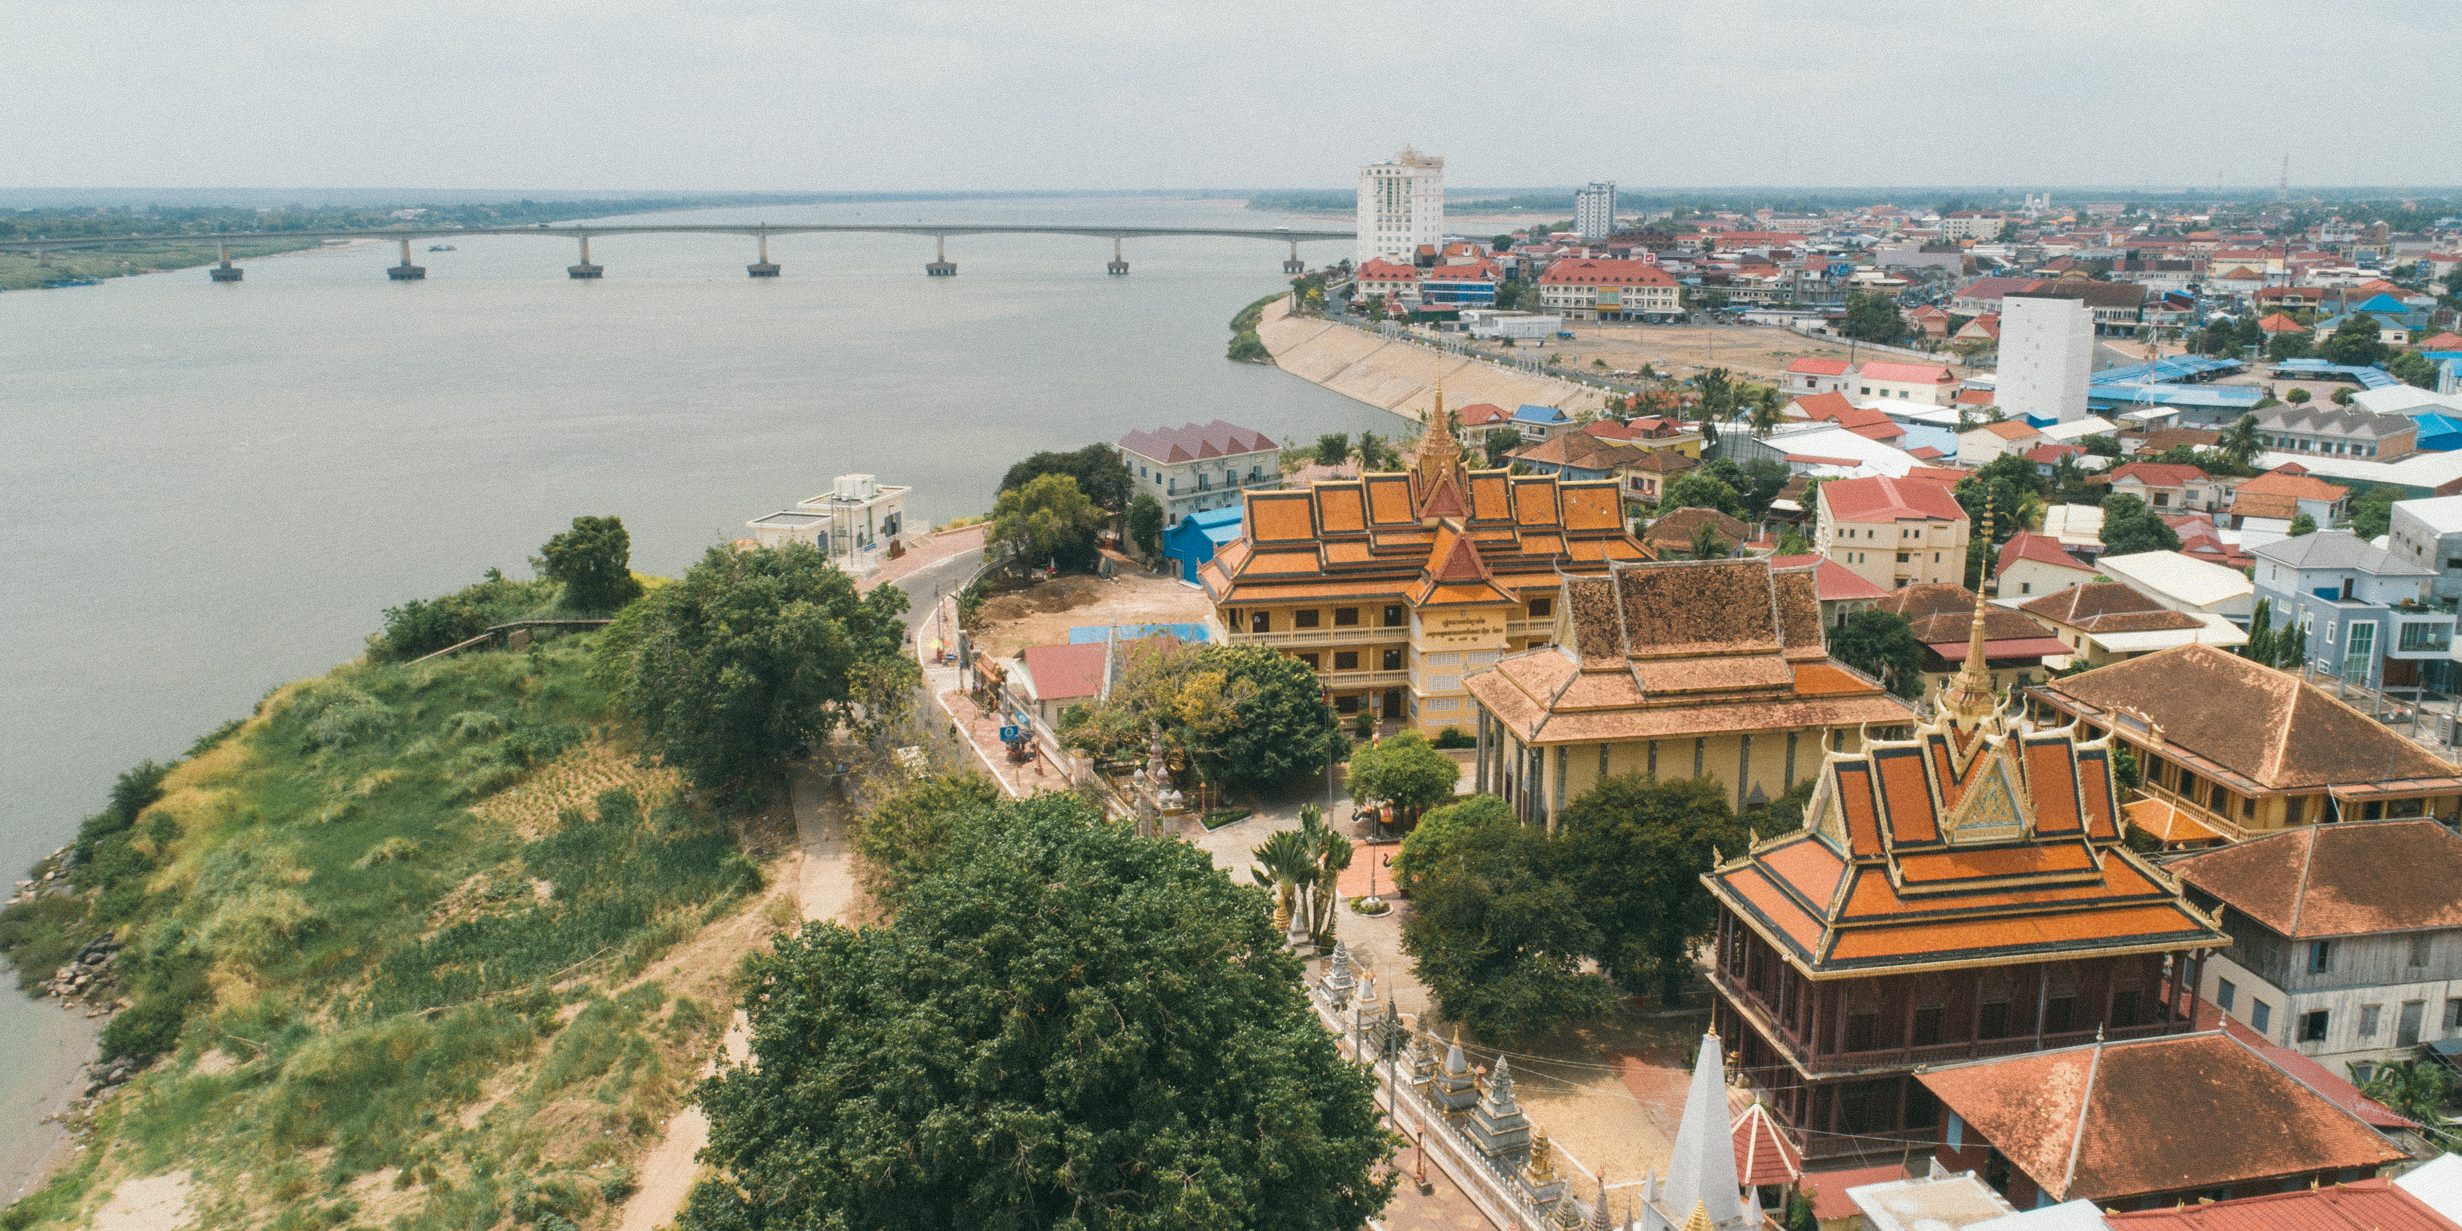 Gap year opportunities could take you to the city of Kampong Cham, beside the Mekong river.